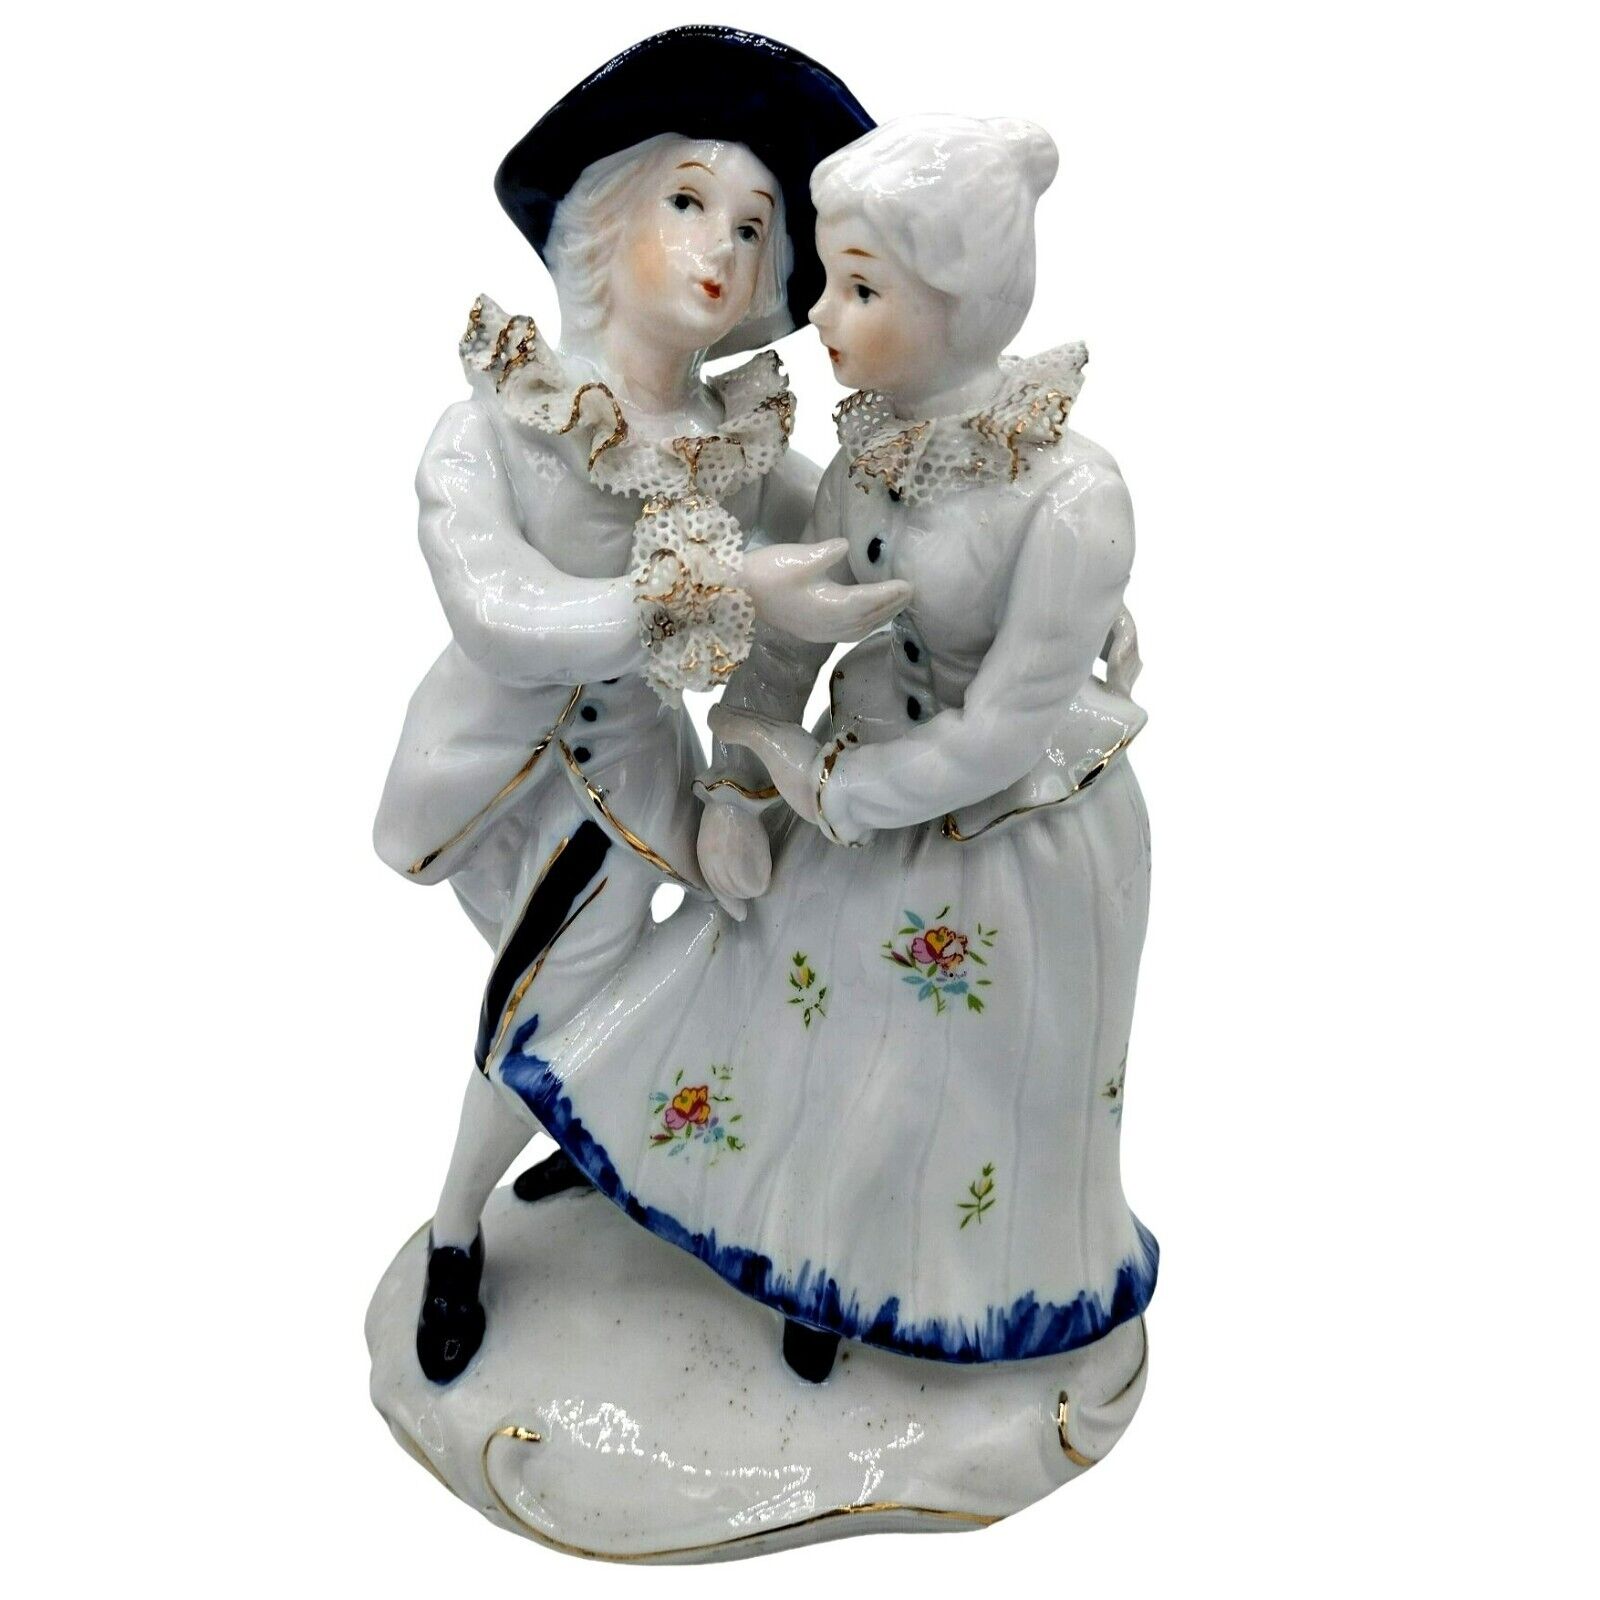 Colonial Dancing Couple with Lace Ruffles Porcelain Bisque Glazed 7.75 Tall